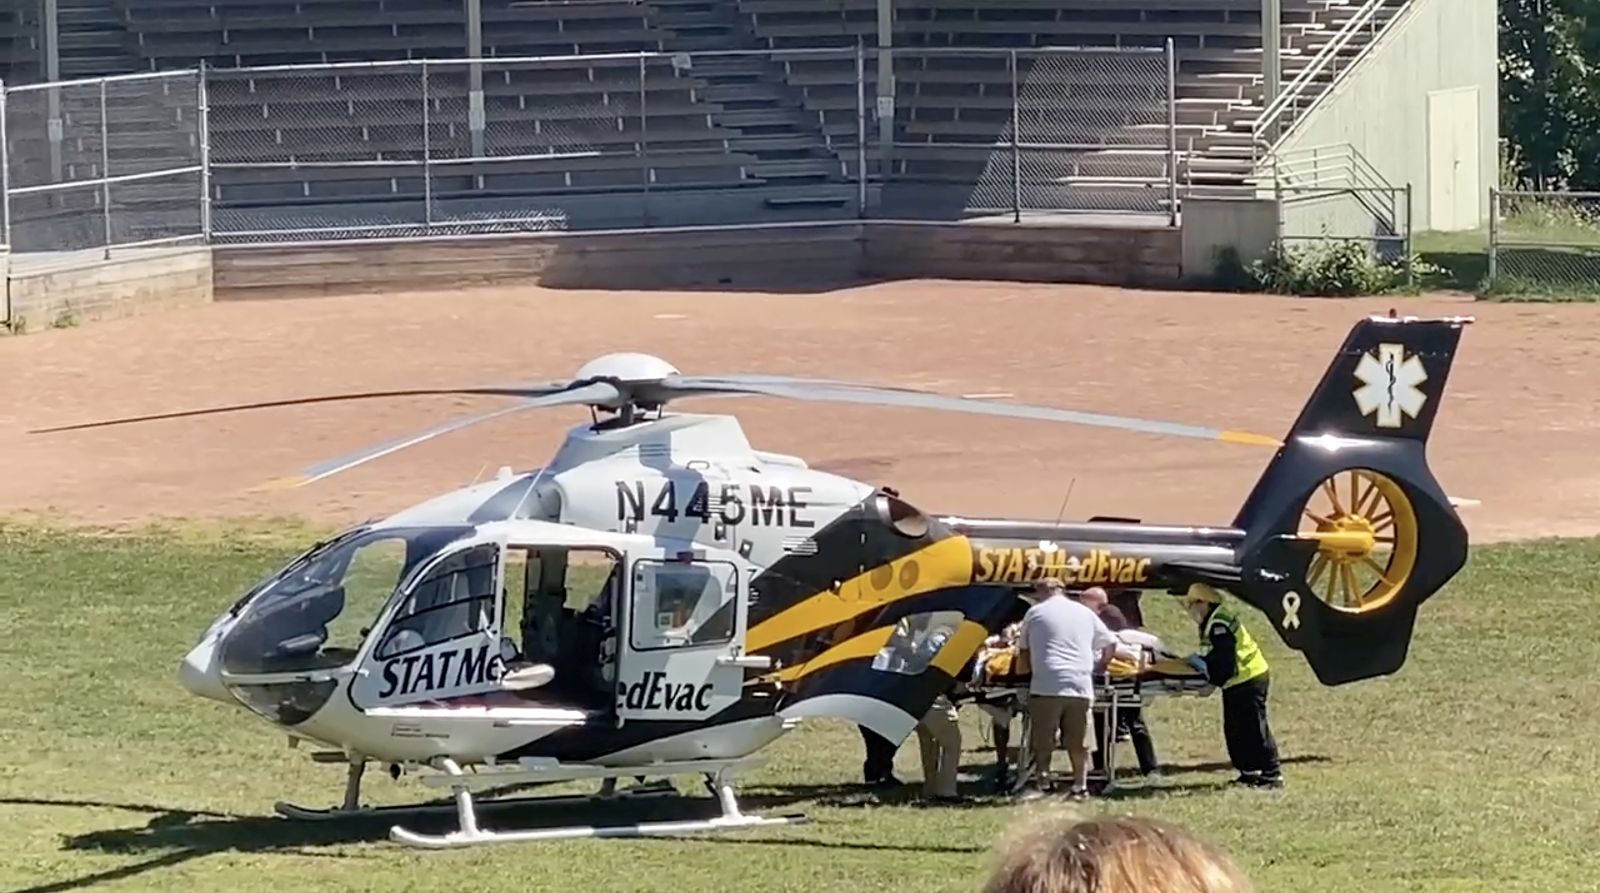 epa10117603 Frame grab from a video released via Twitter user @HoratioGates3 and used with permission, showing Salman Rushdie being loaded into a MedEvac helicopter after he and an interviewer were attacked while on stage at an event in Chautauqua, New York State, USA, 12 August 2022. The suspect was taken into custody, New York State police said. Rushdie, who was reportedly stabbed in the neck, was transported to a hospital.  EPA/@HoratioGates3 EDITORIAL USE ONLY, NO SALES HANDOUT EDITORIAL USE ONLY/NO SALES